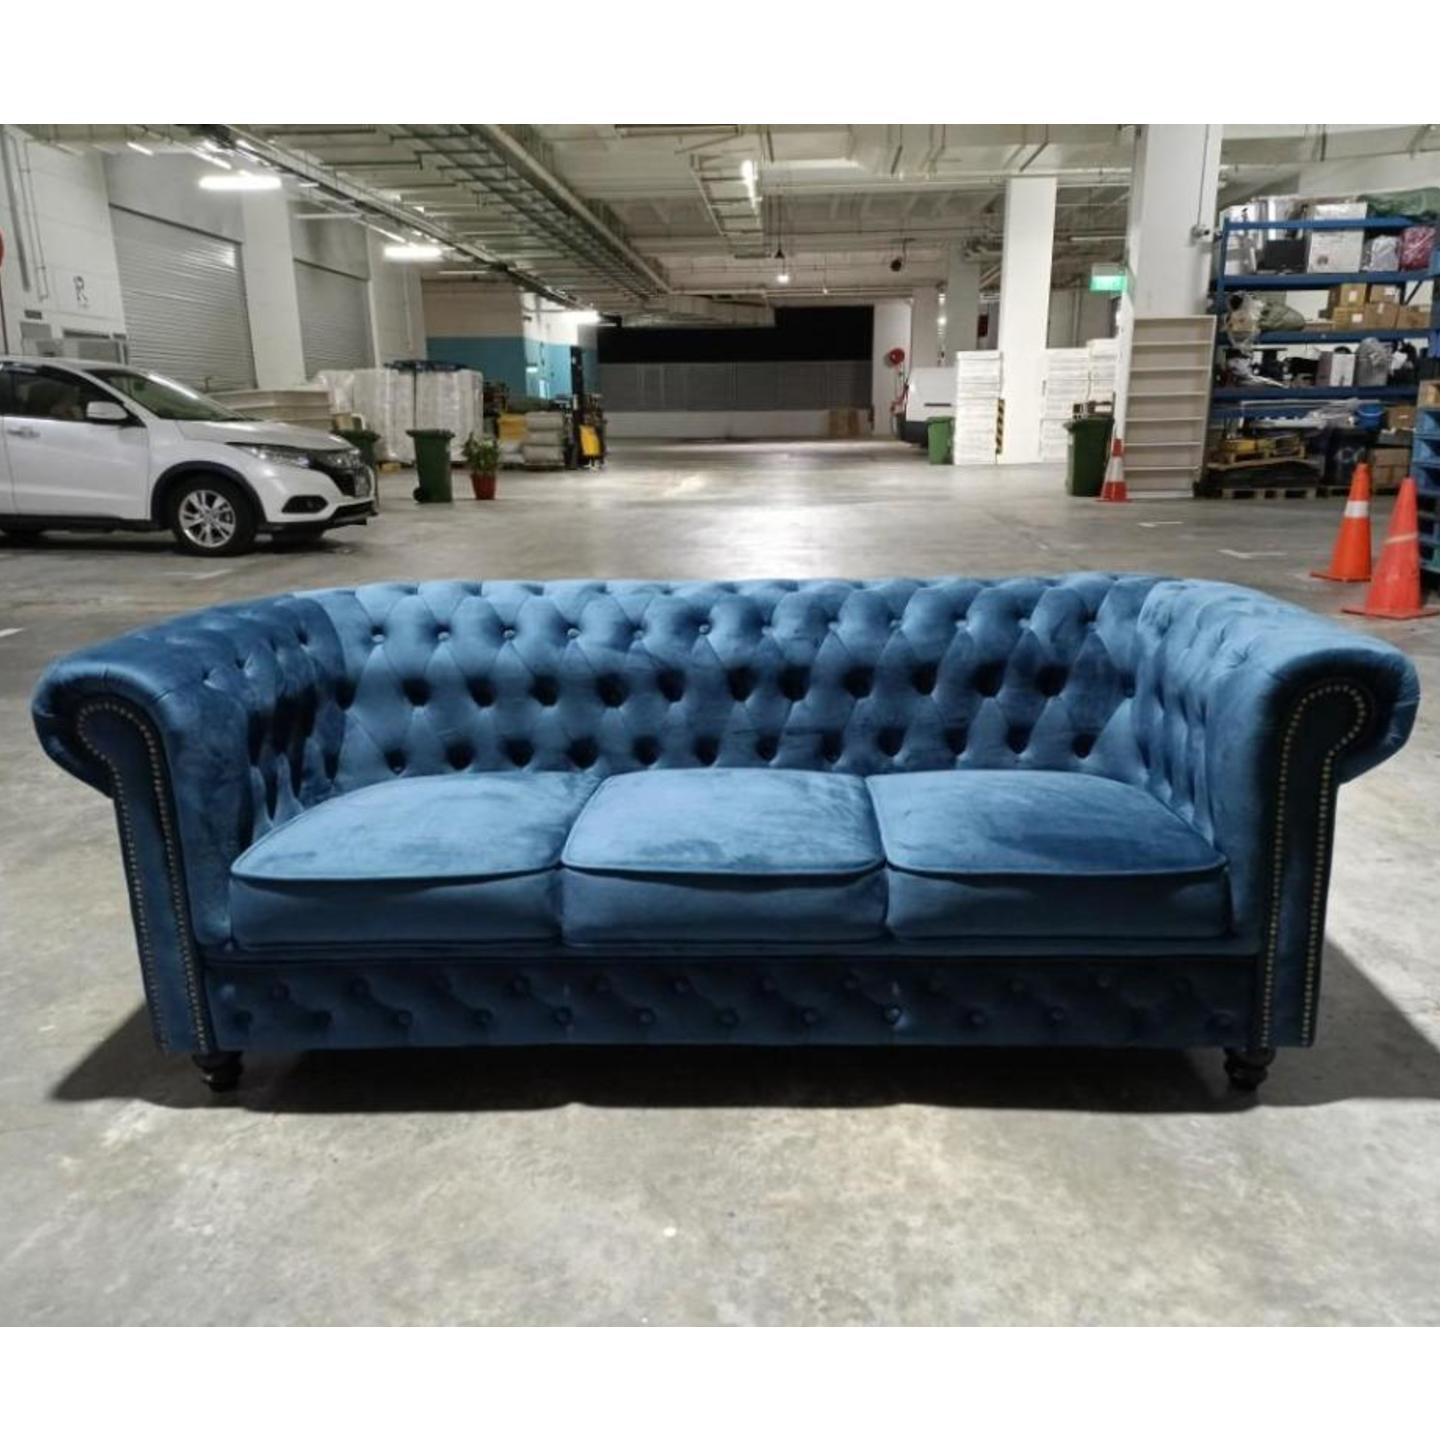 (PRE ORDER) SALVADORE X 3 Seater Chesterfield Sofa in MIDNIGHT BLUE VELVET - Estimated Delivery by End August 2022